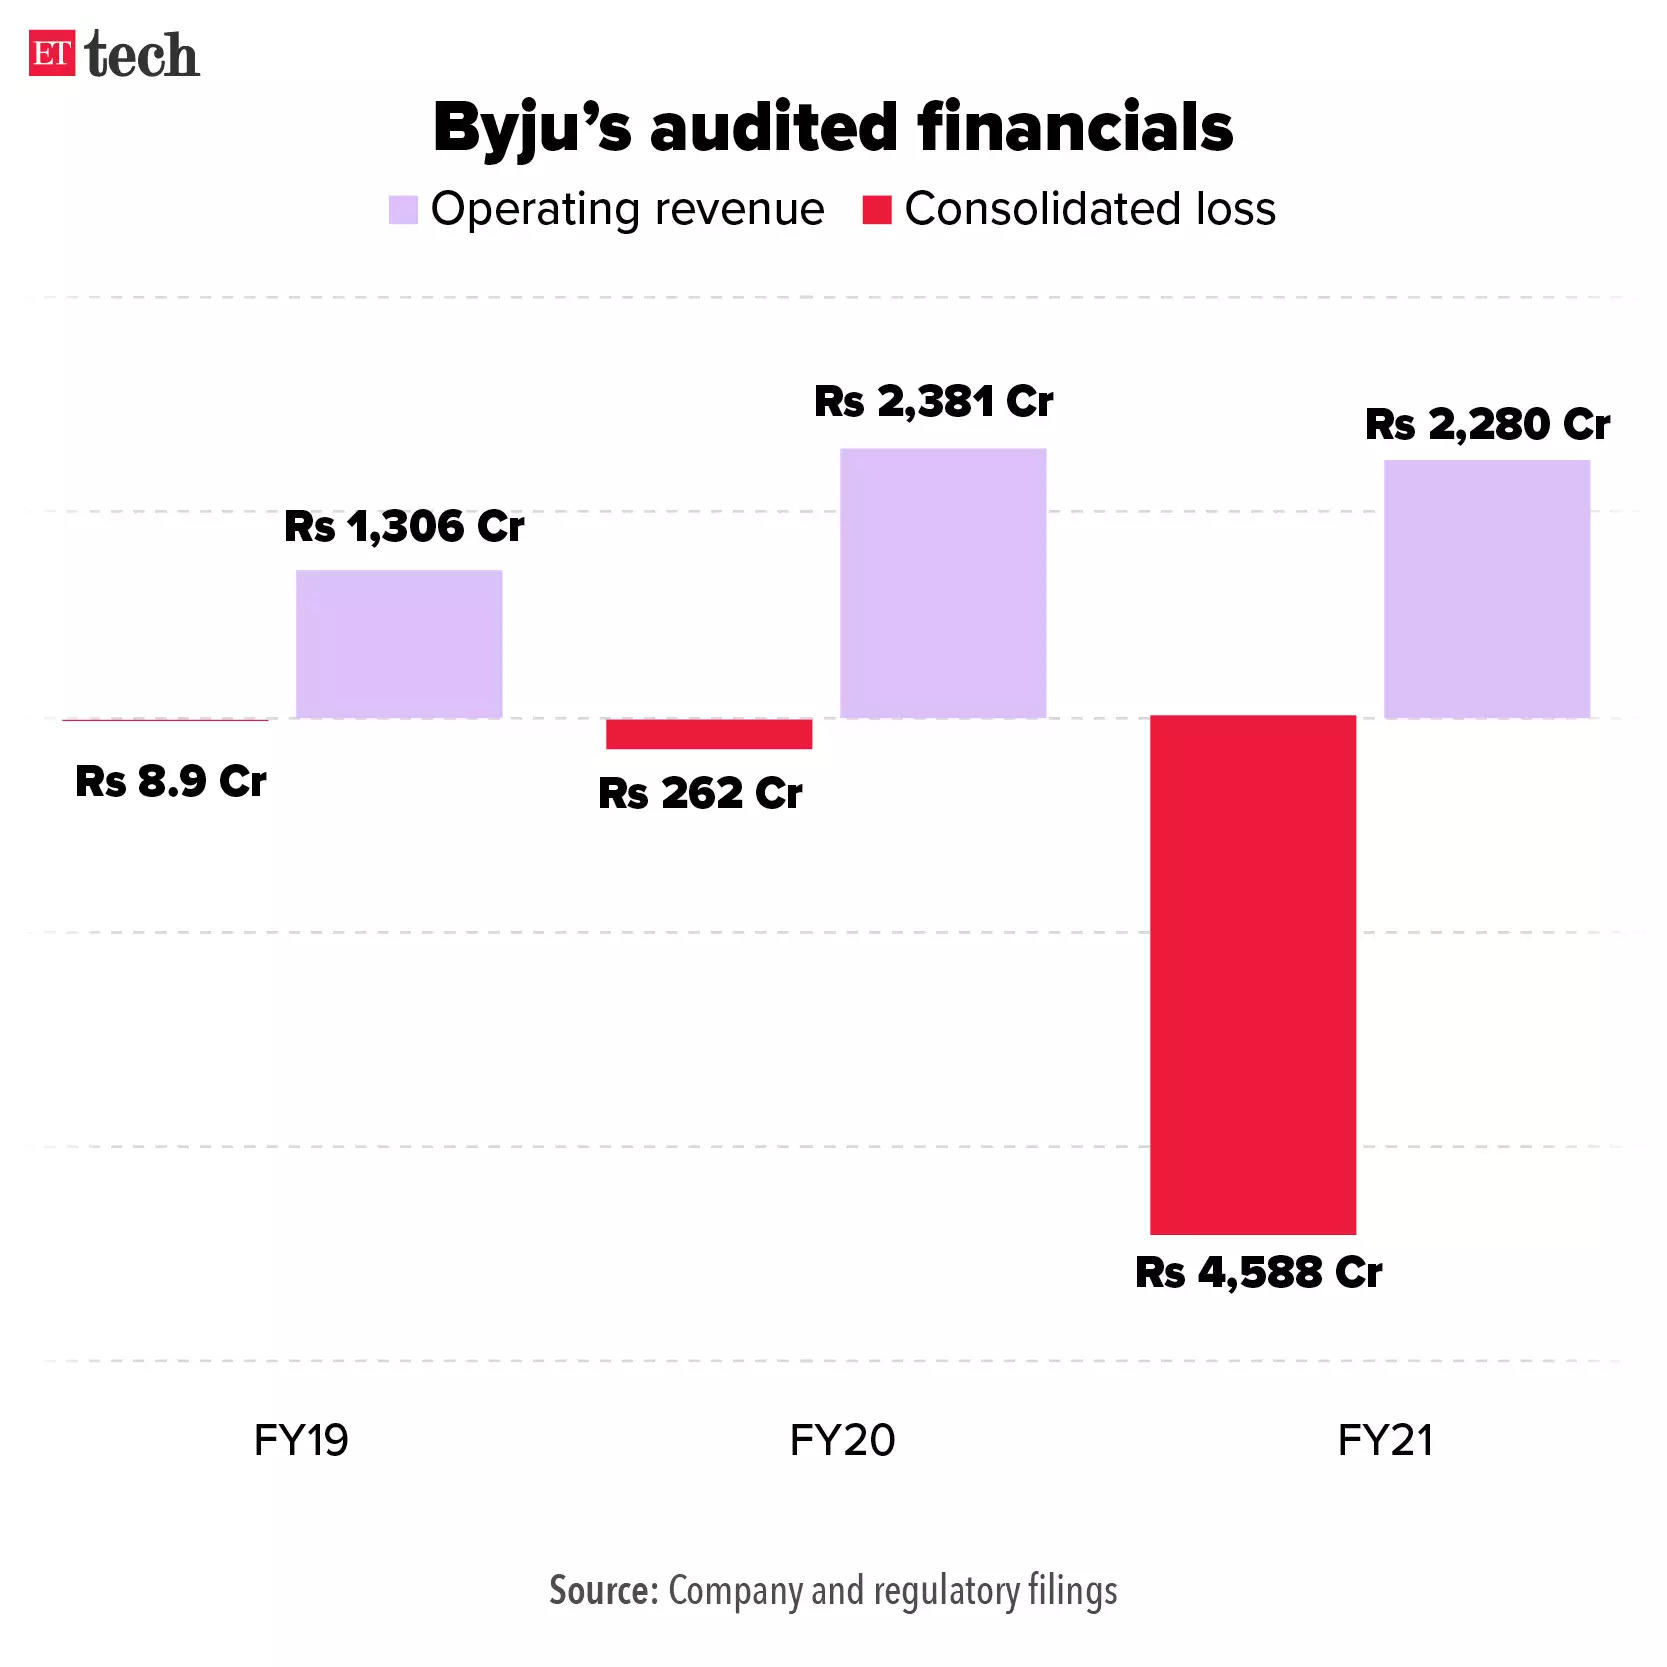 byjus-audited-financials-1.